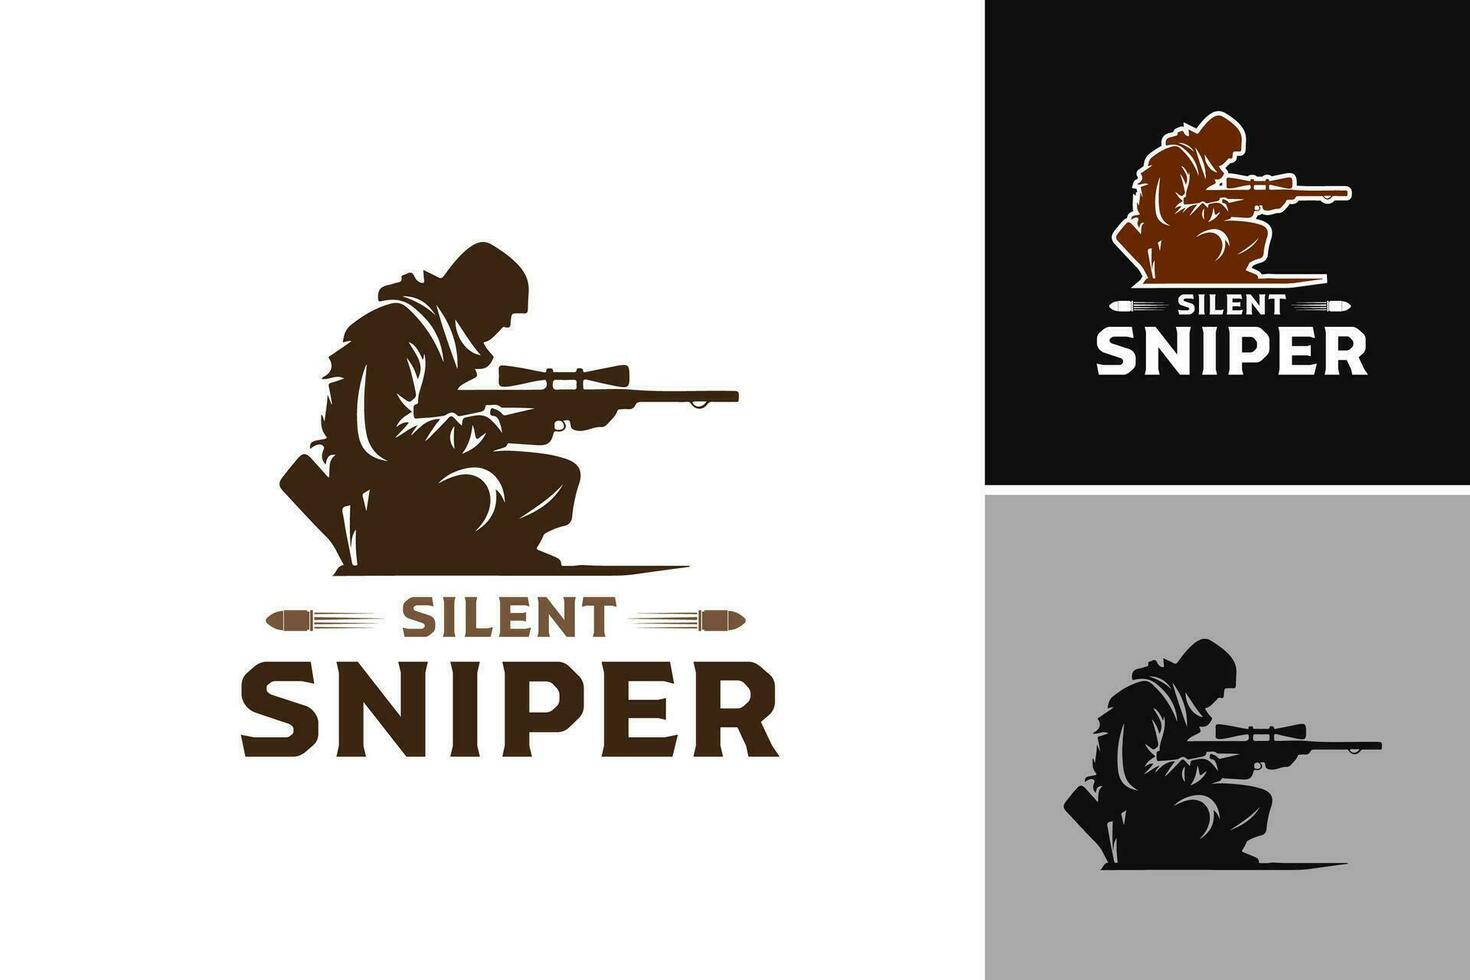 Silent Sniper Logo is a logo design asset that is ideal for businesses or organizations looking to convey qualities such as precision, stealth, and accuracy vector